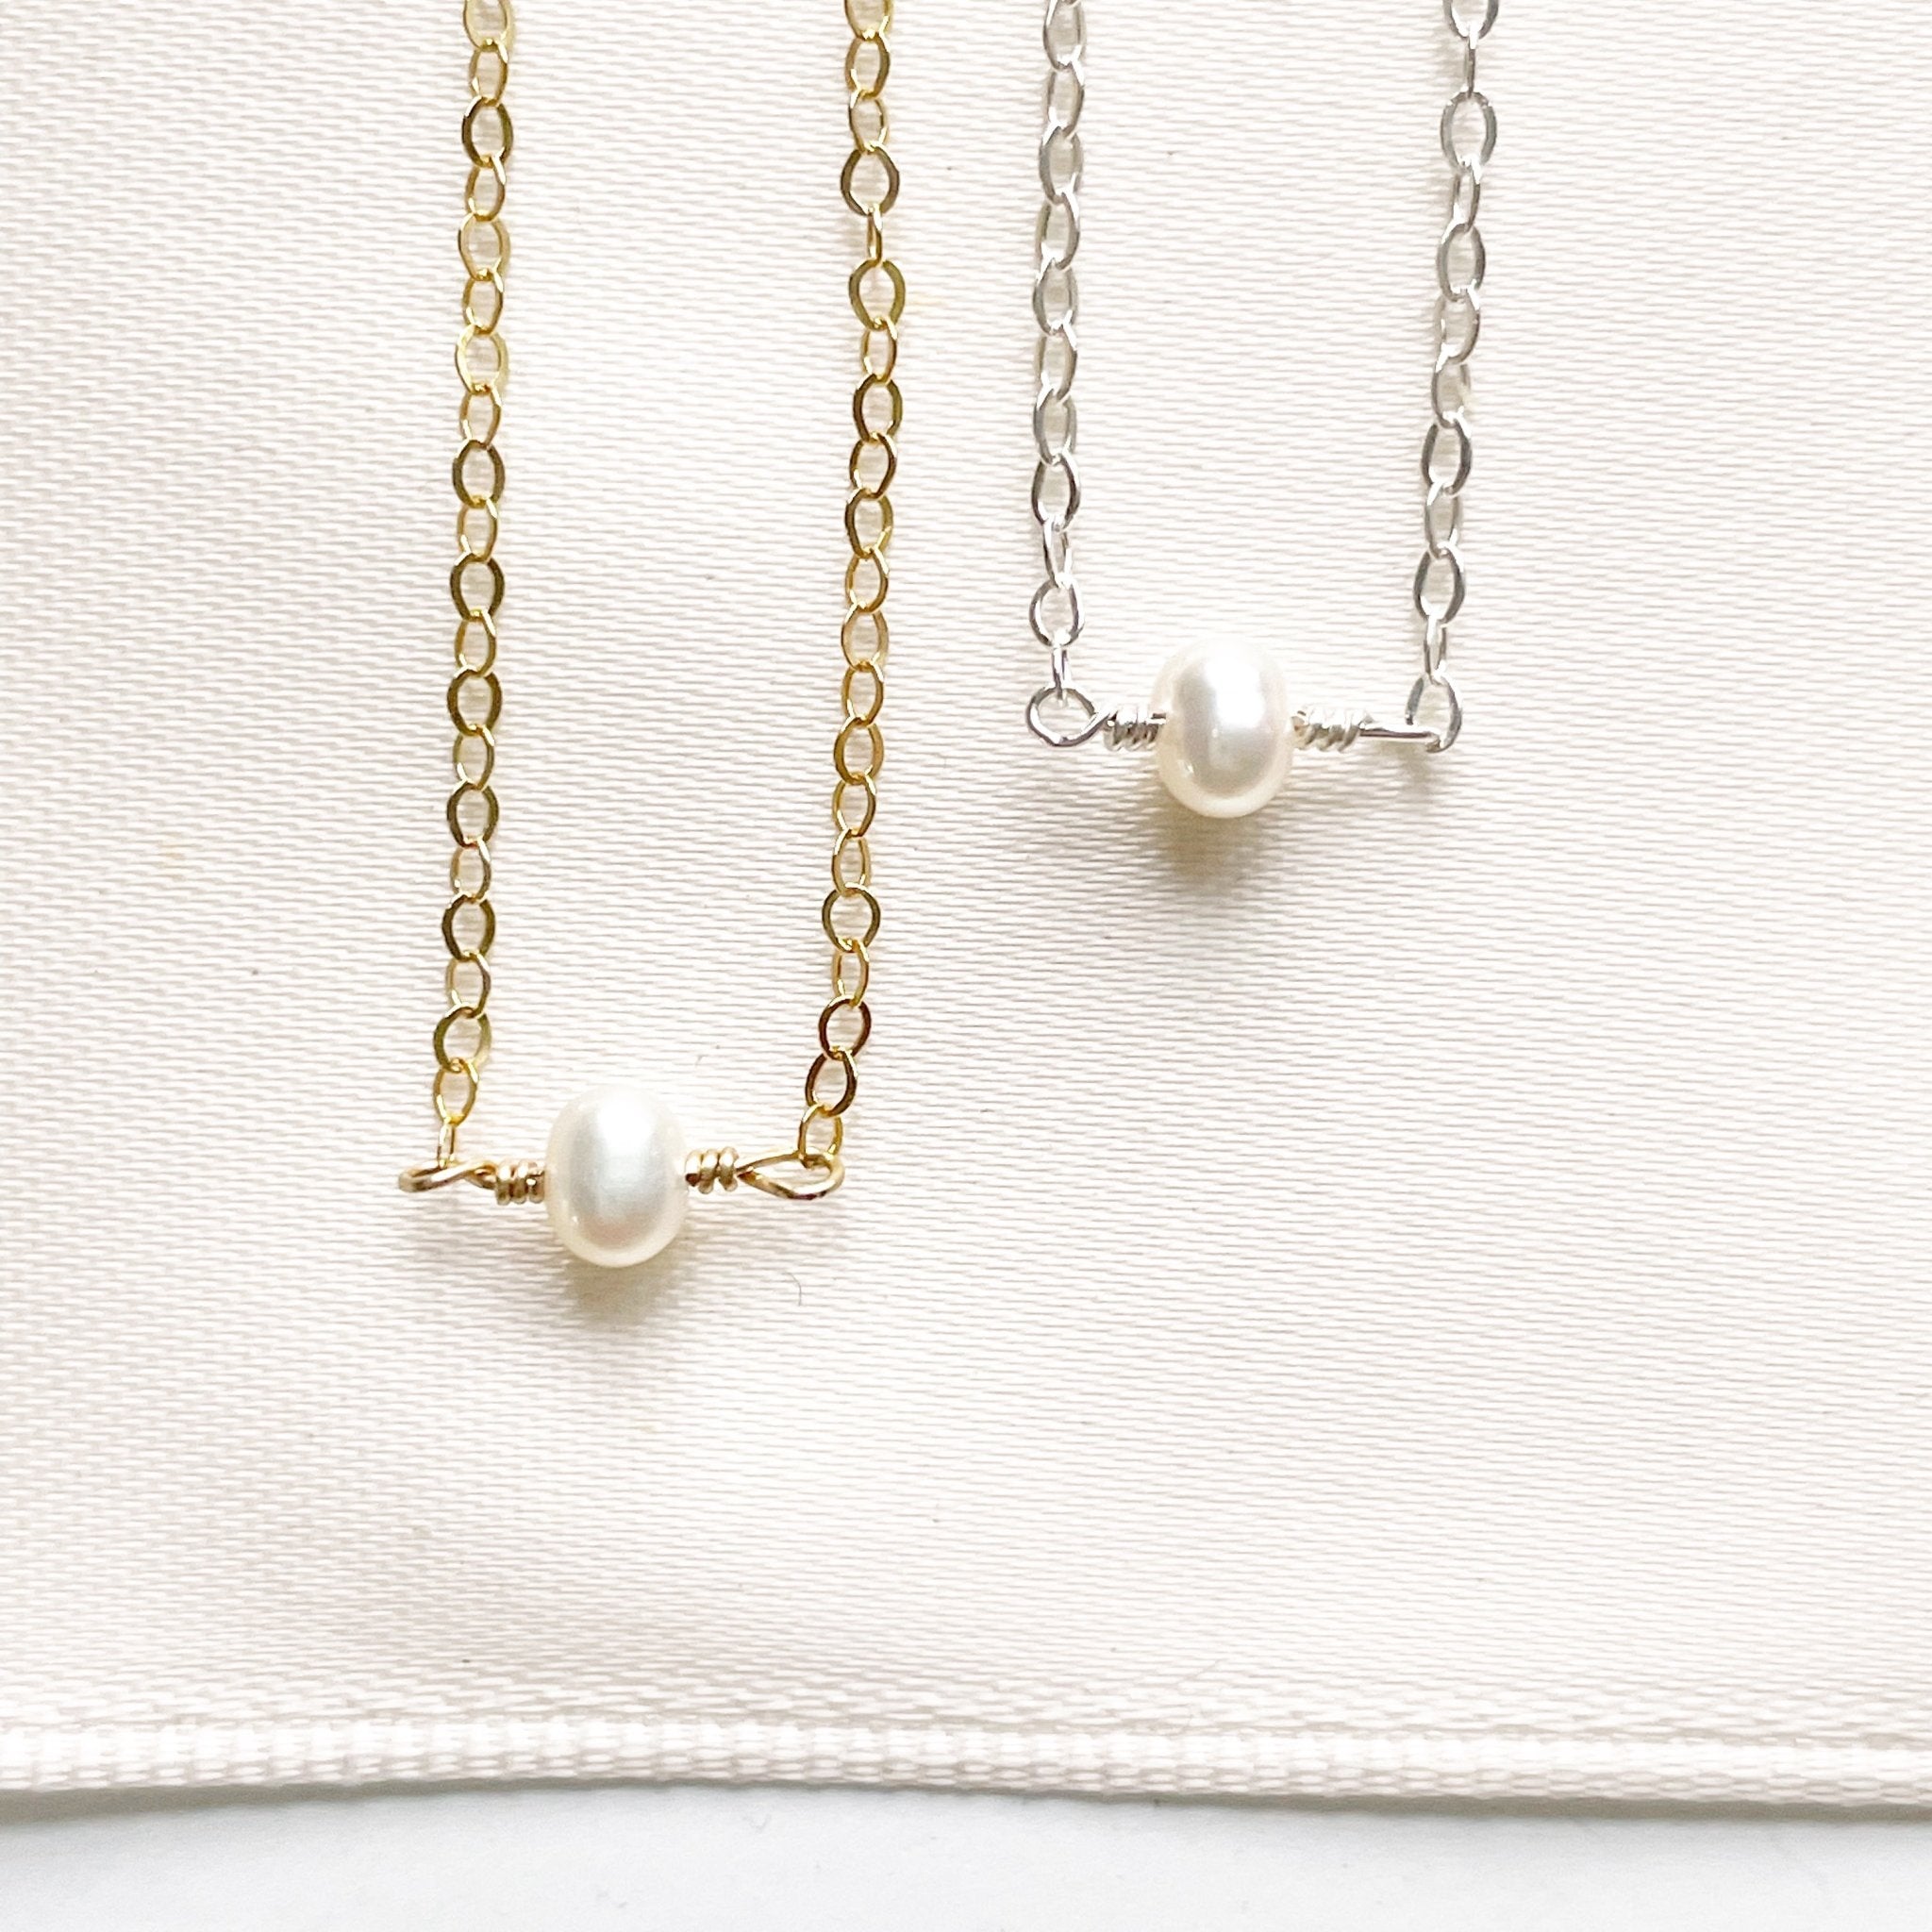 Gold and silver dainty pearl layering necklaces. Carys Necklace by Sarah Cornwell Jewelry